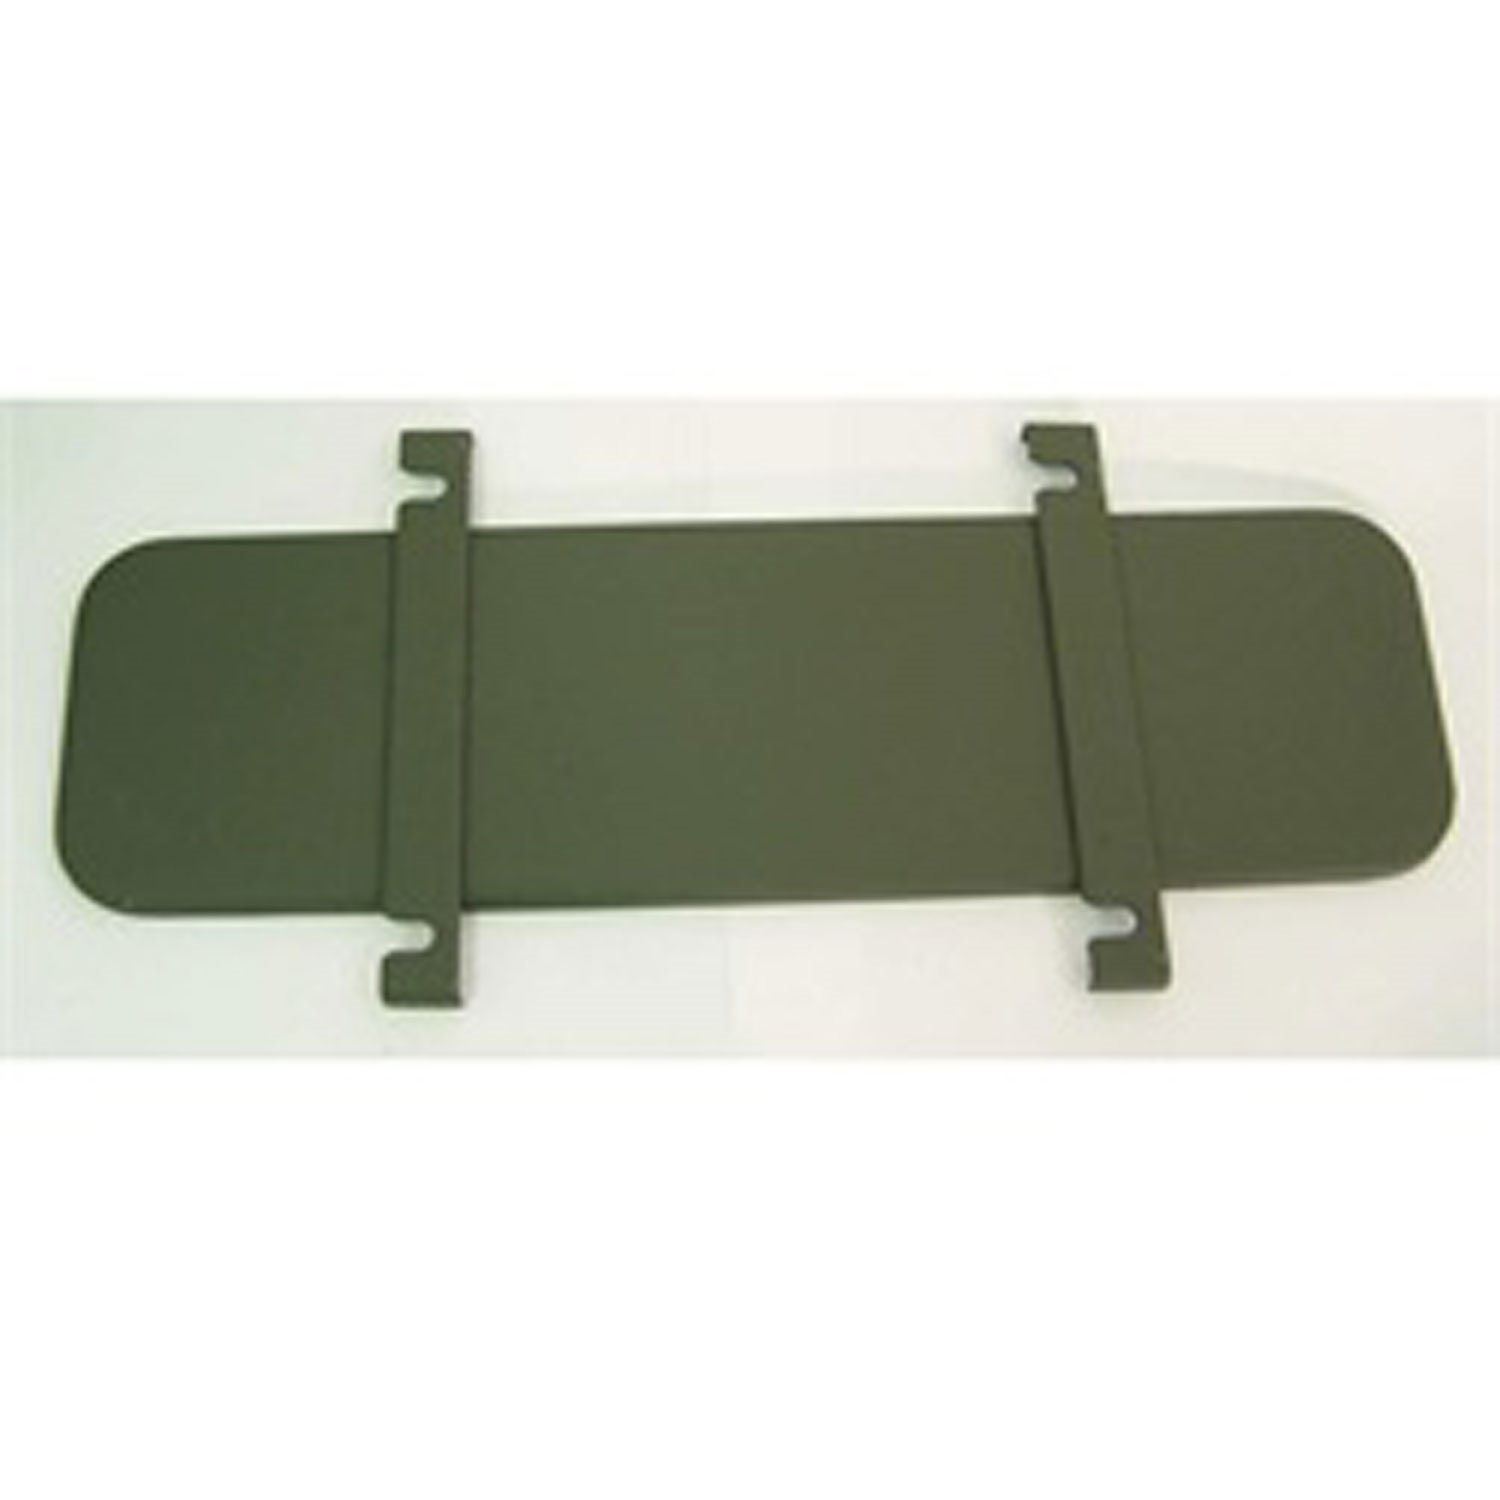 This windshield-mounted ventilator cover from Omix-ADA fits 50-52 Willys M38.